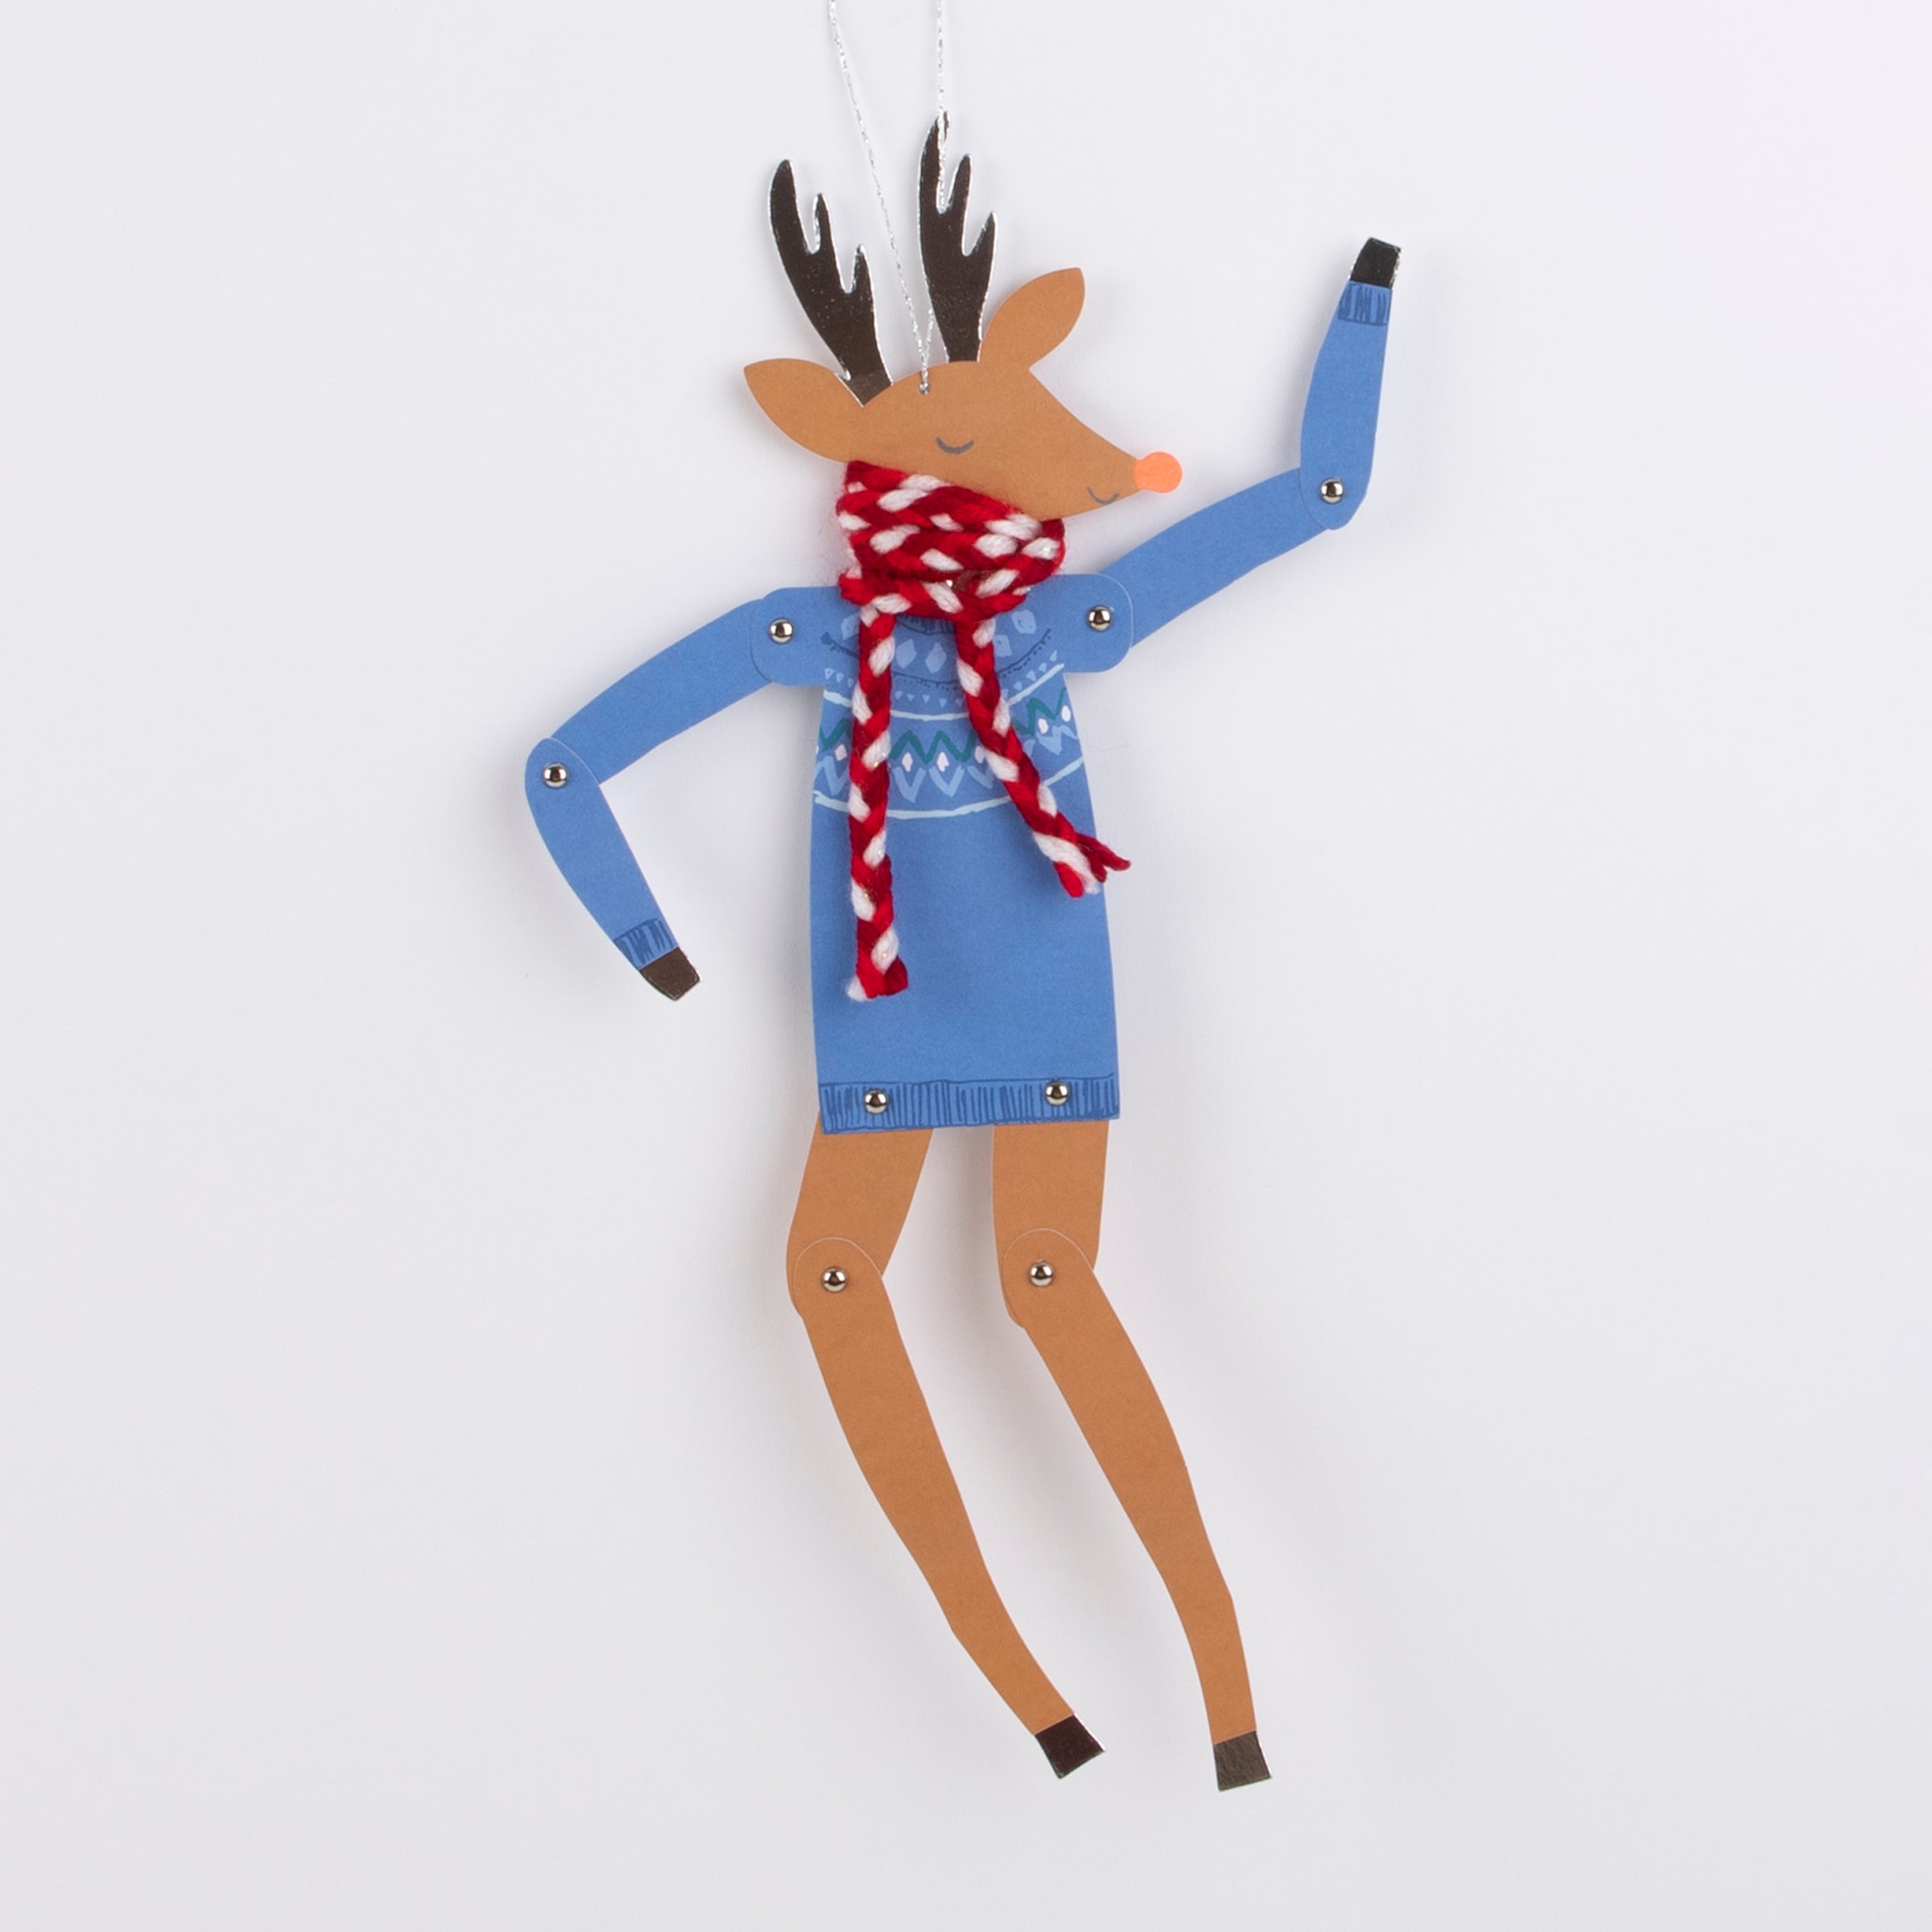 The fabulous reindeer hanging Christmas decoration is embellished with yarn and shiny silver foil, with split pins to allow it to move.